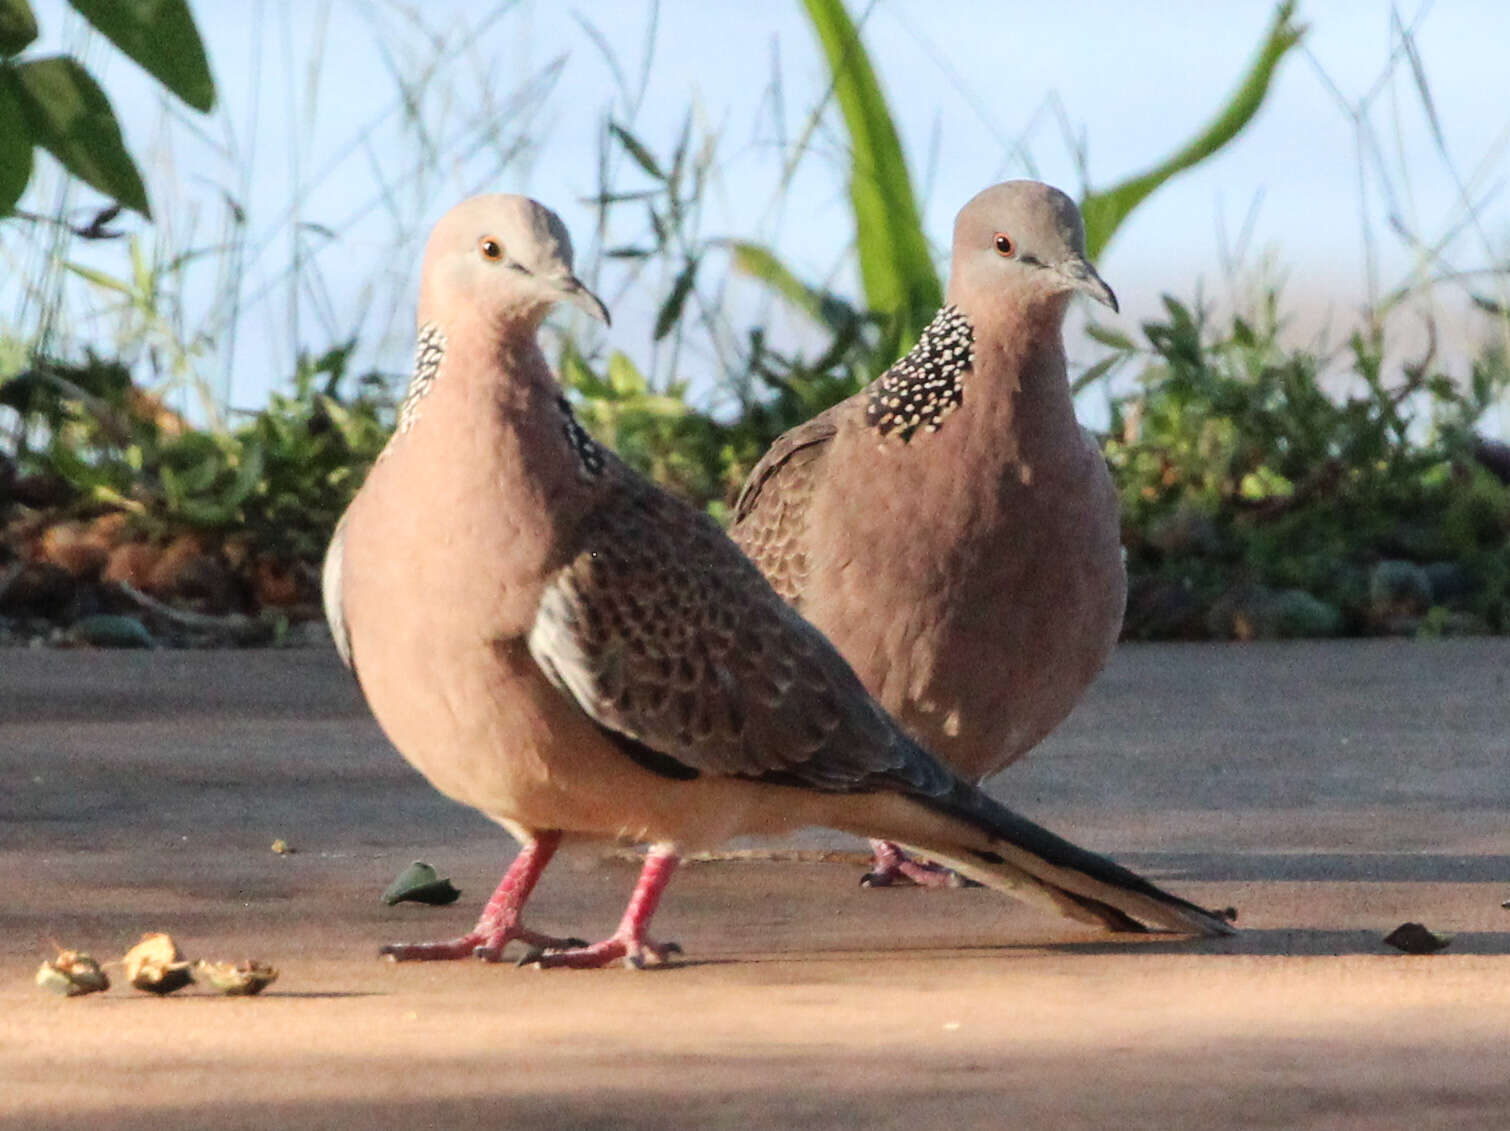 Image of spotted dove